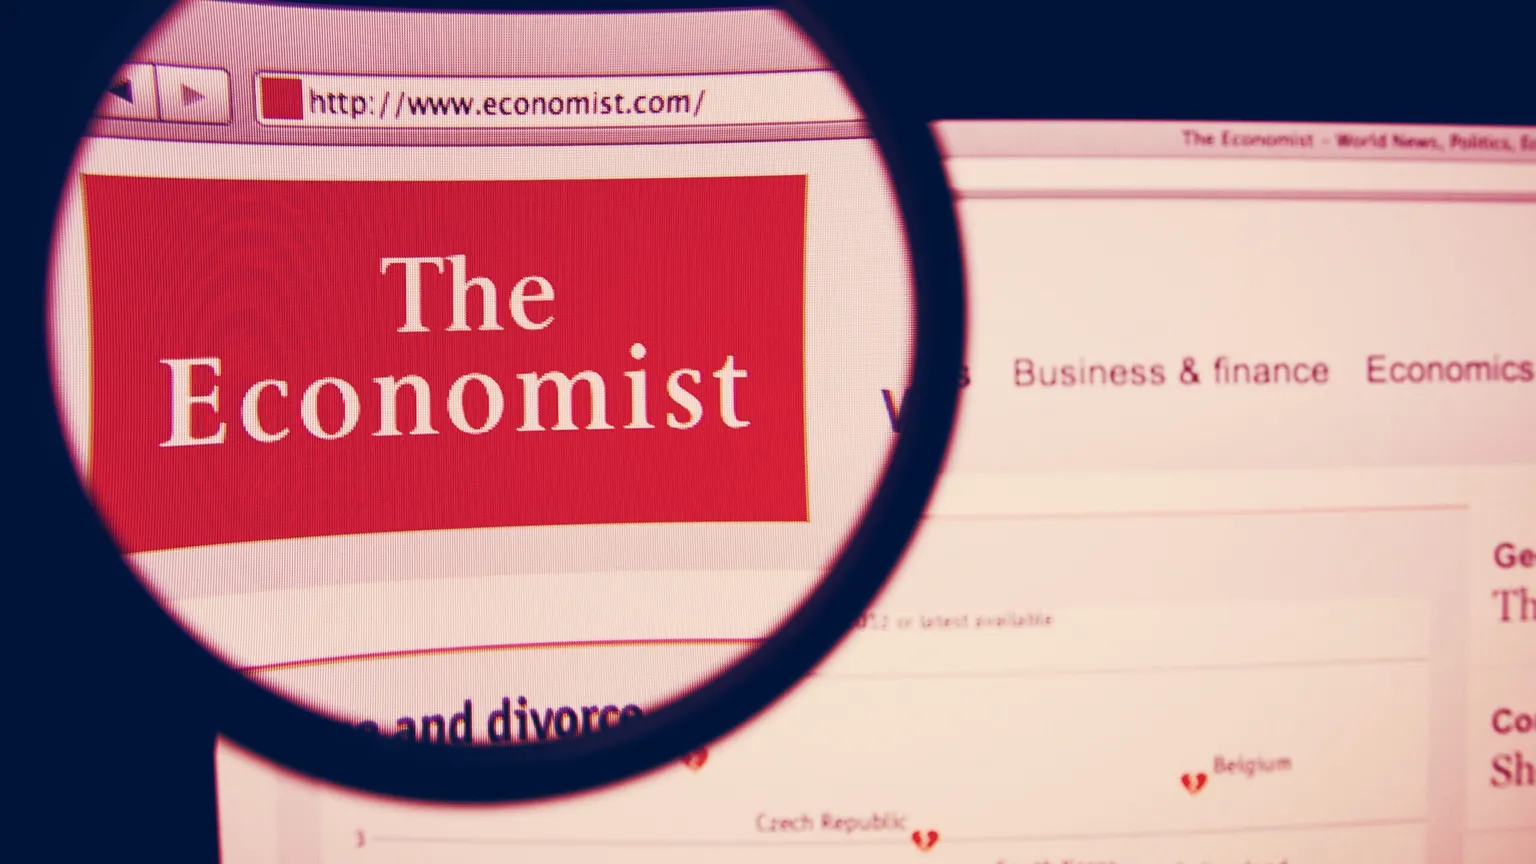 The Economist is one of the world's most reputable finance publications. Image: Shutterstock